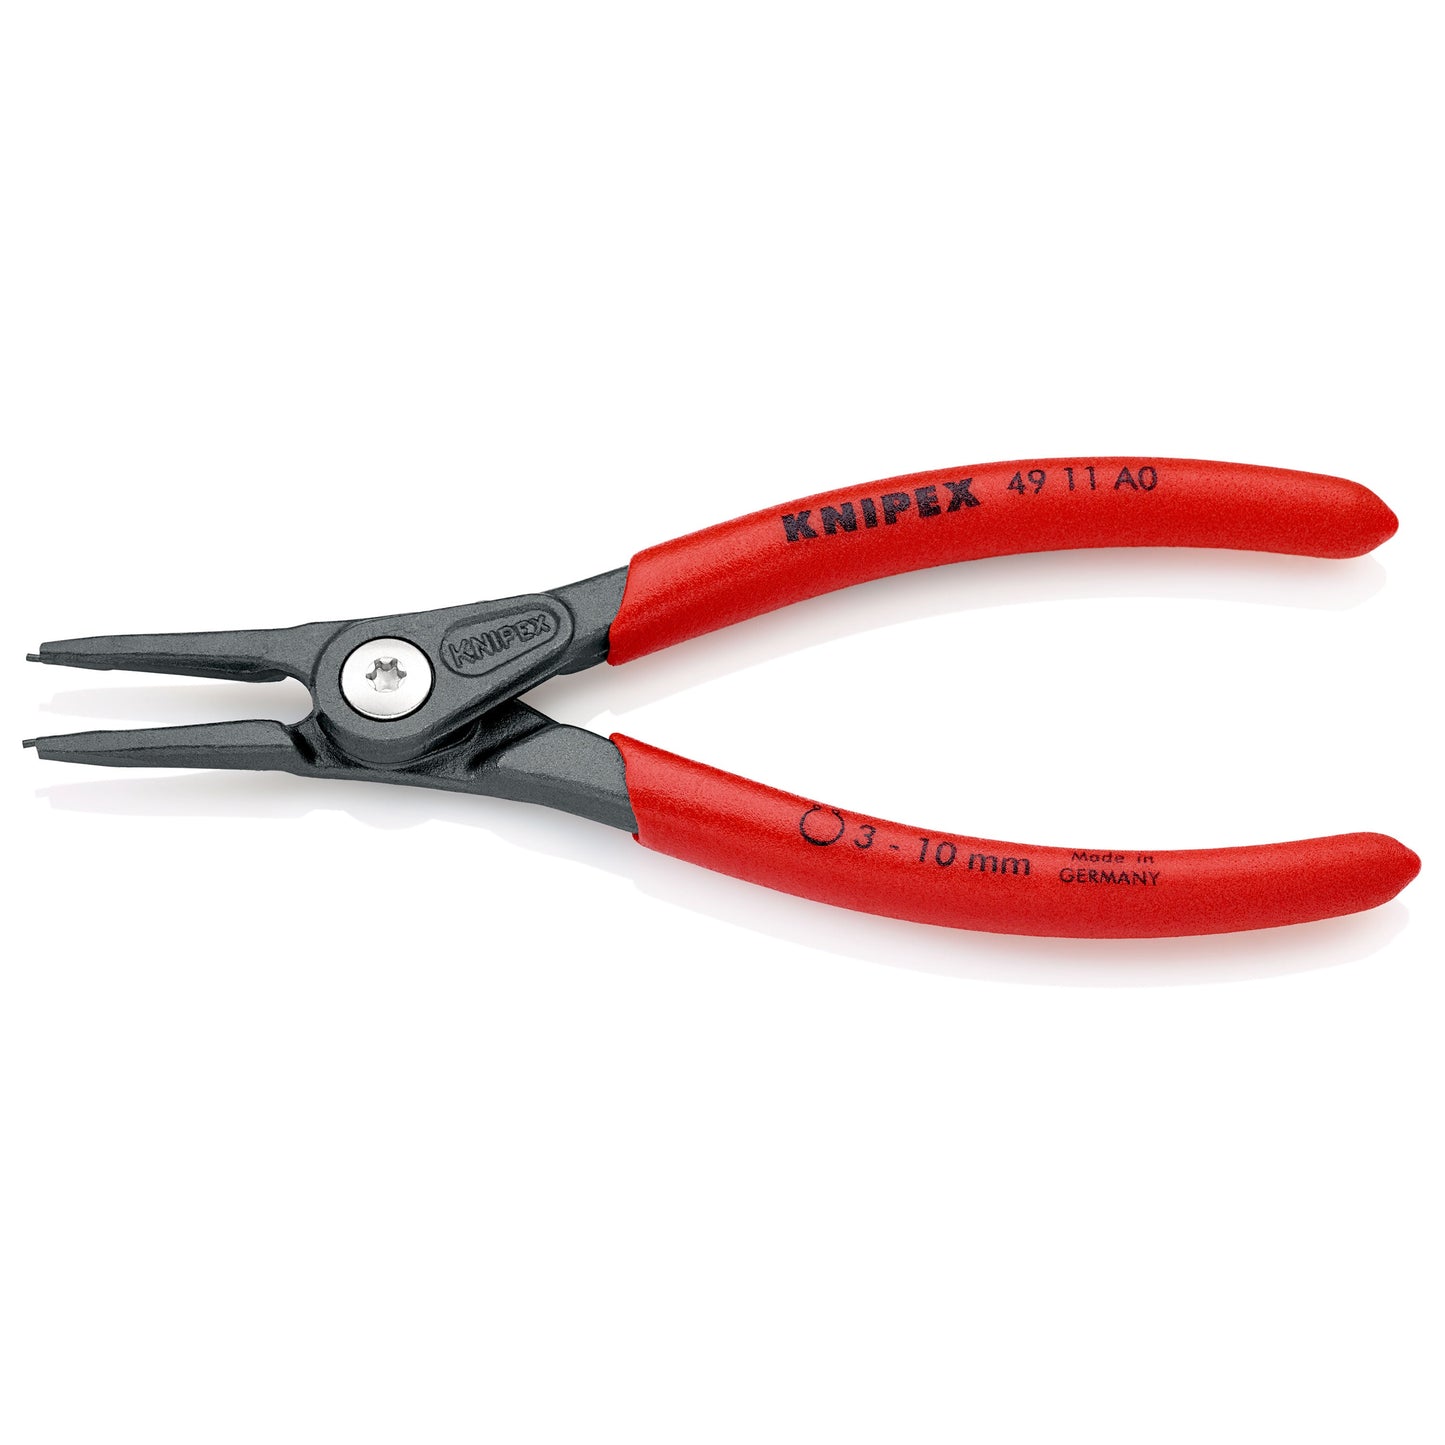 Knipex 49 11 A0 - Straight precision pliers for external washers, for washers from 3 to 10 mm